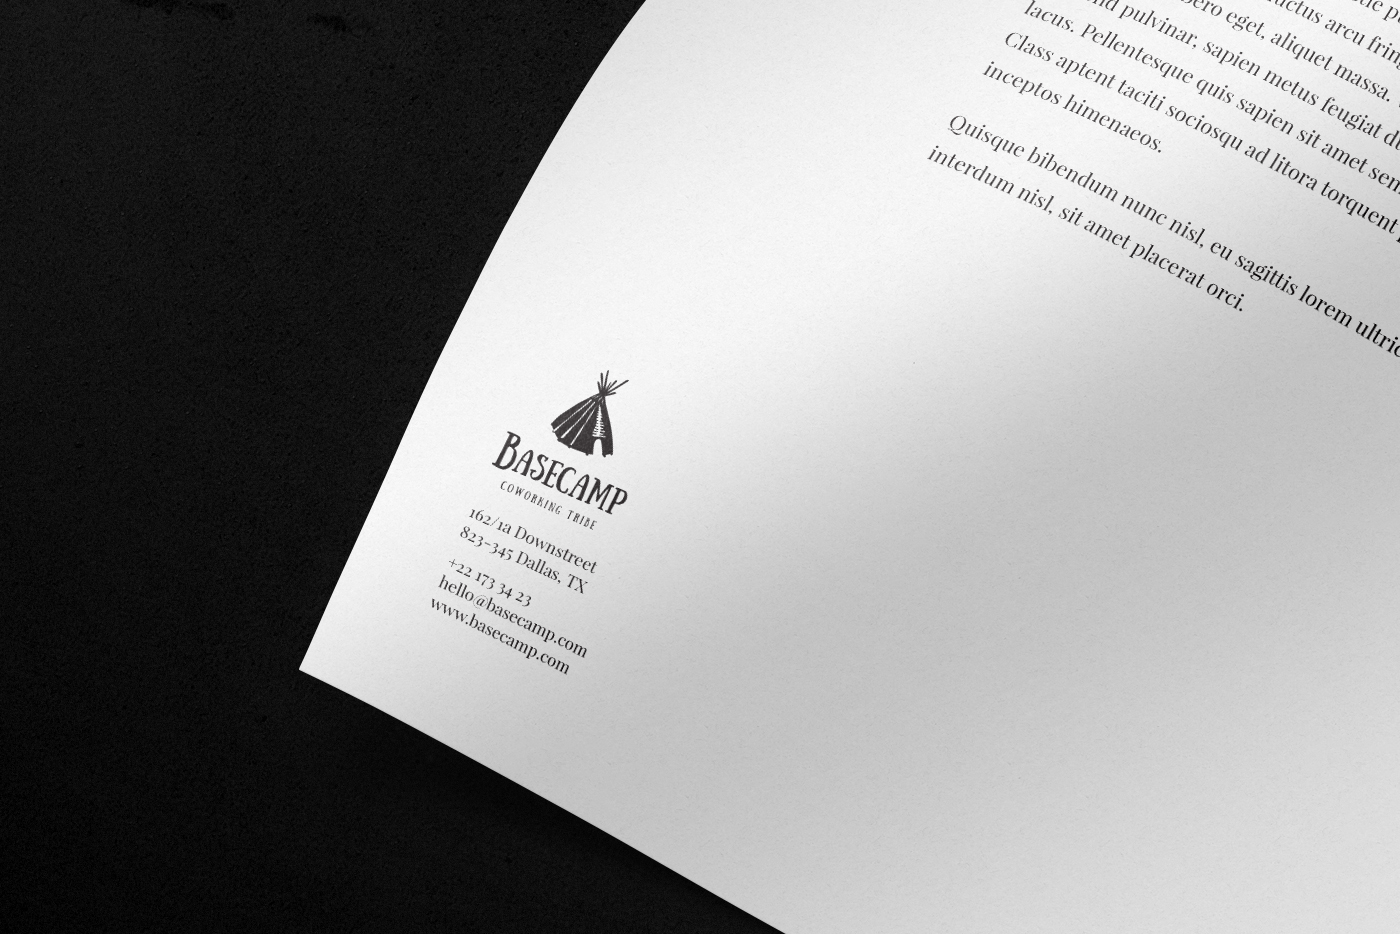 mobby dick basecamp logo Tipi indian native american coworking tribe identity stationary business card letterhead Website black & white